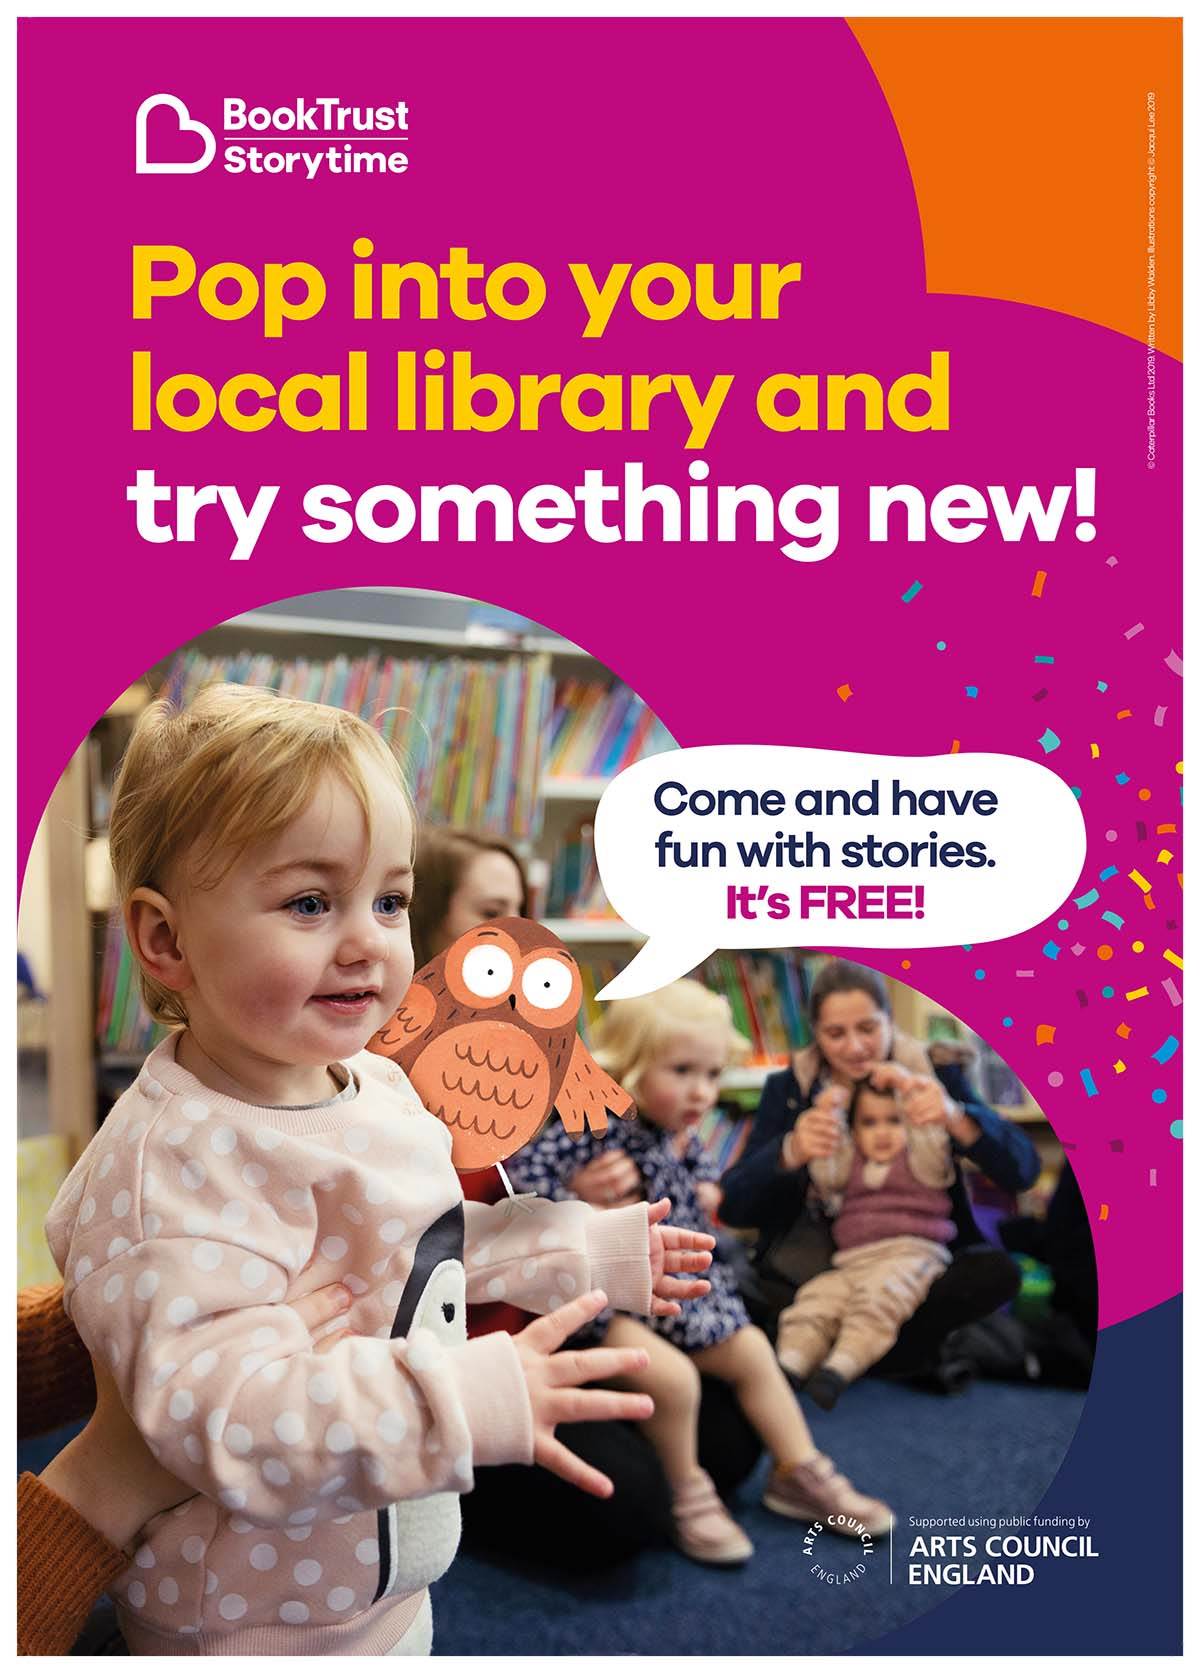 A poster for BookTrust Storytime inviting you to visit your local library